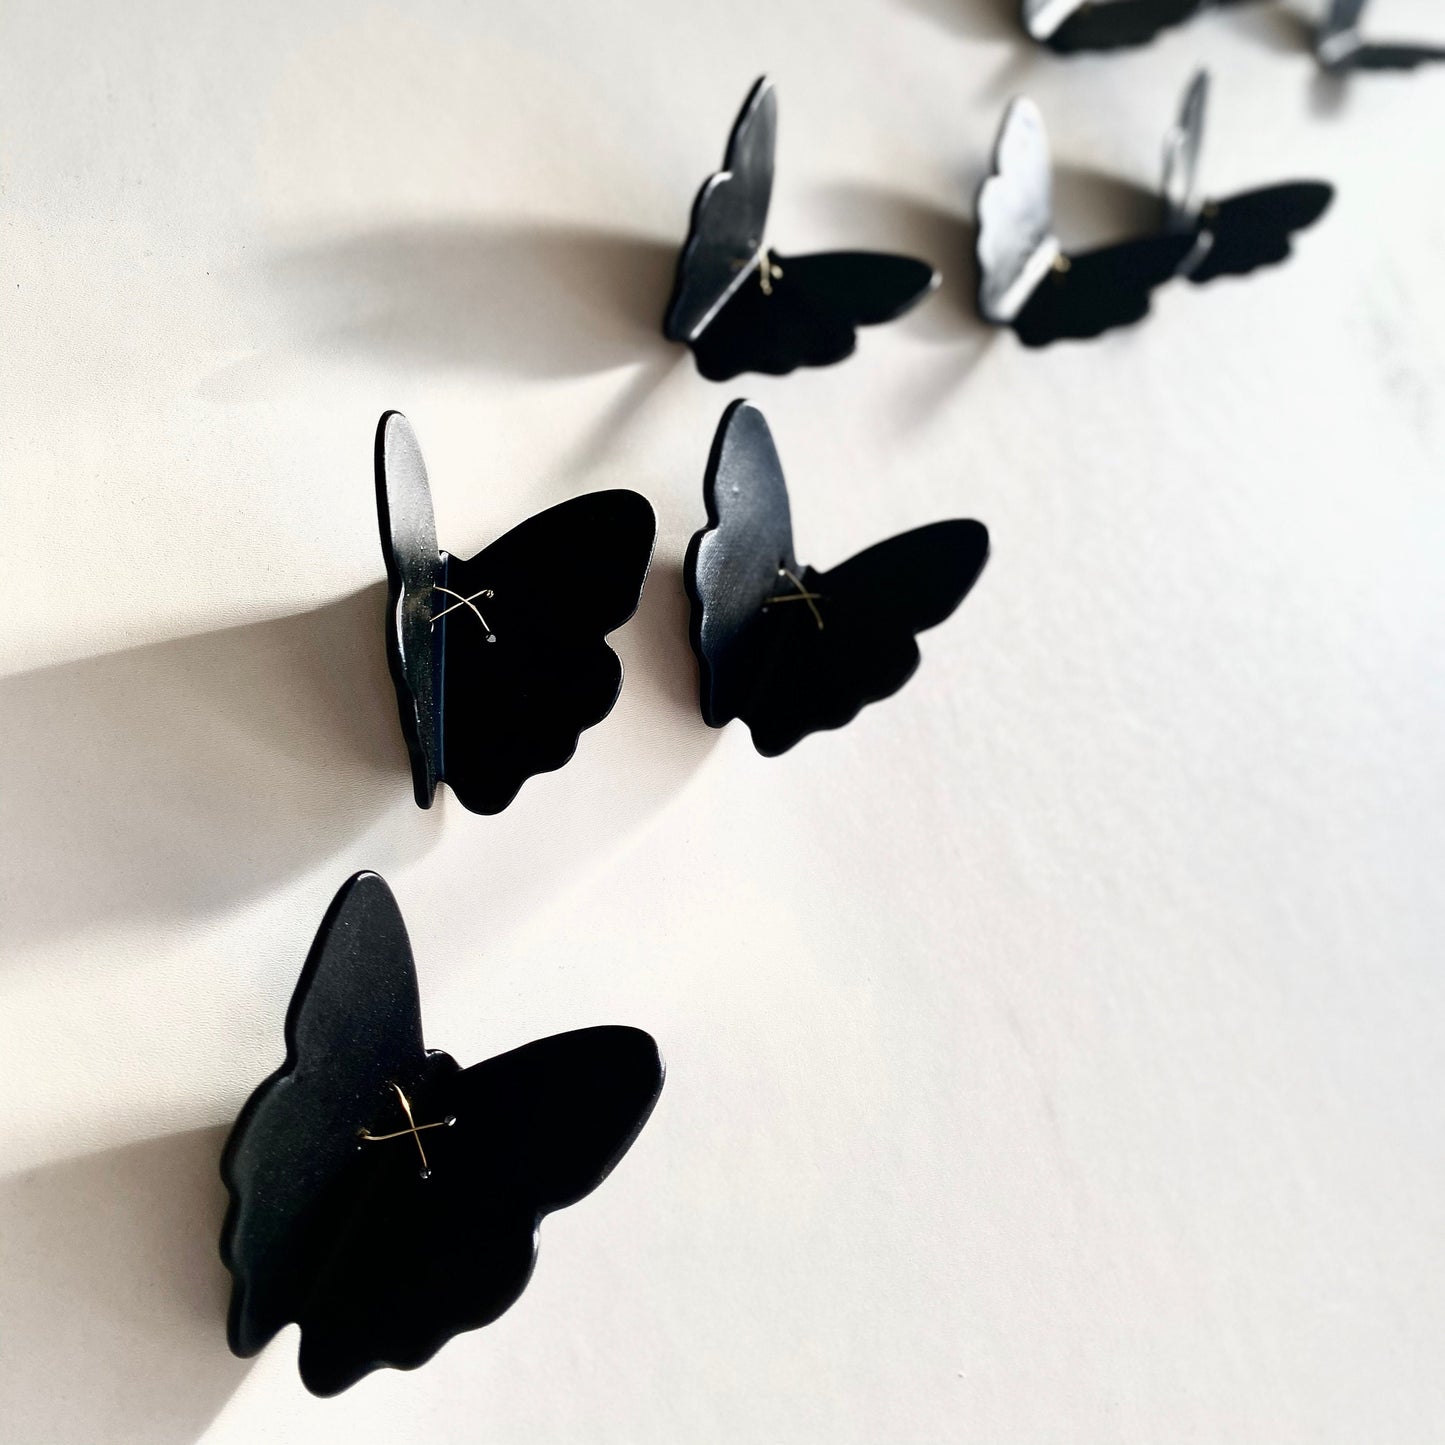 3D Butterfly wall art Black and gold porcelain ceramic butterflies Large wall sculpture Set of 10 butterflies with metal wire Dramatic art